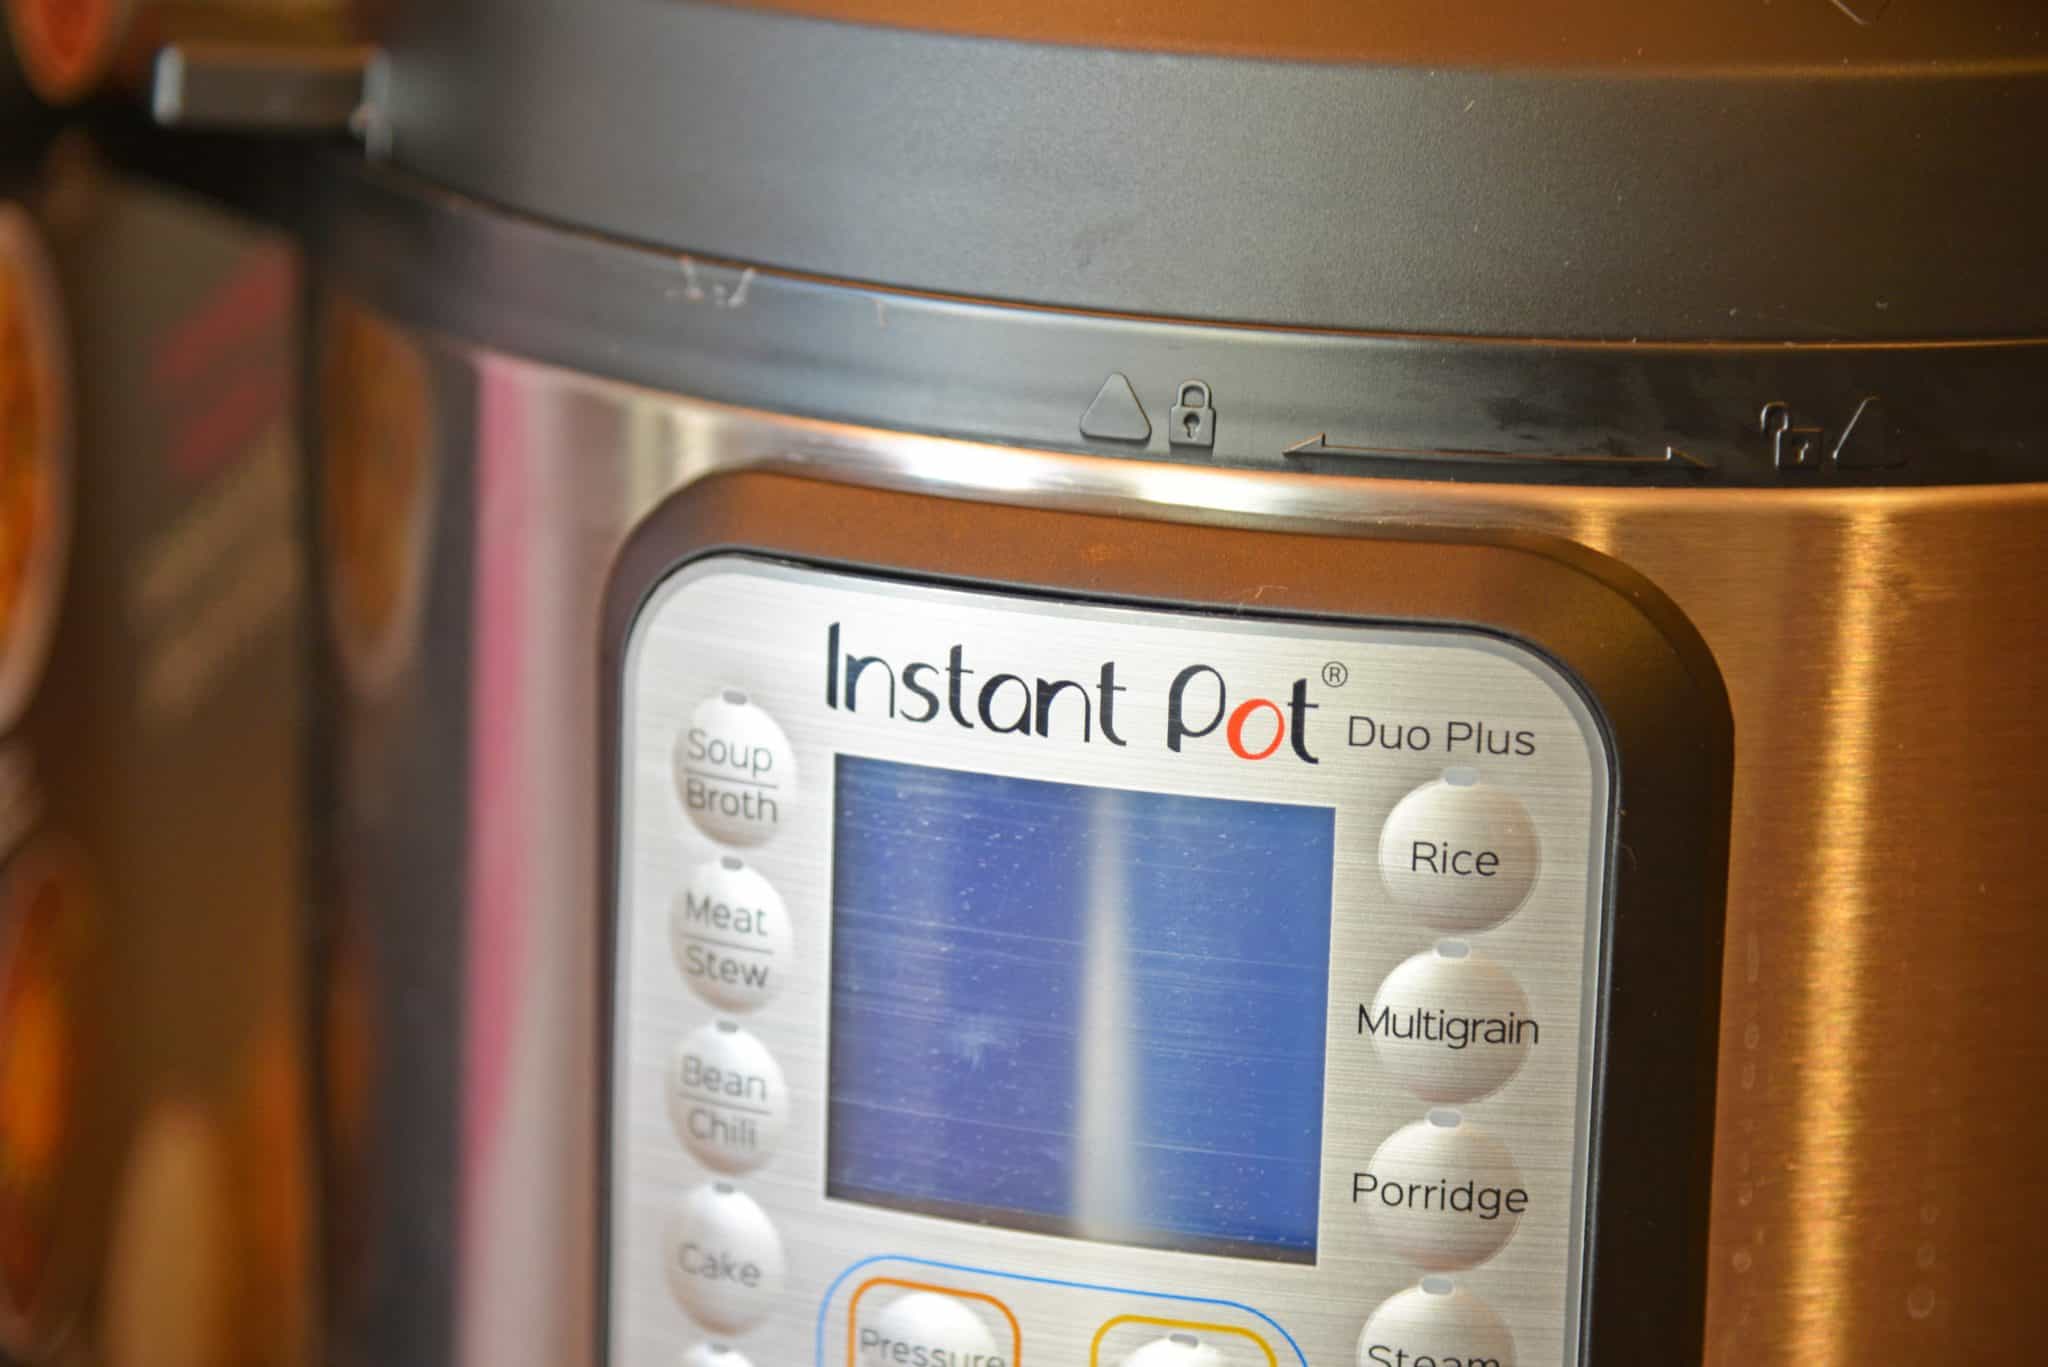 So you have an Instant Pot. Now what? Here I will give Instant Pot 101- a crash course in how to understand and use your Instant Pot. #instantpot #instantpotrecipes www.savoryexperiments.com 